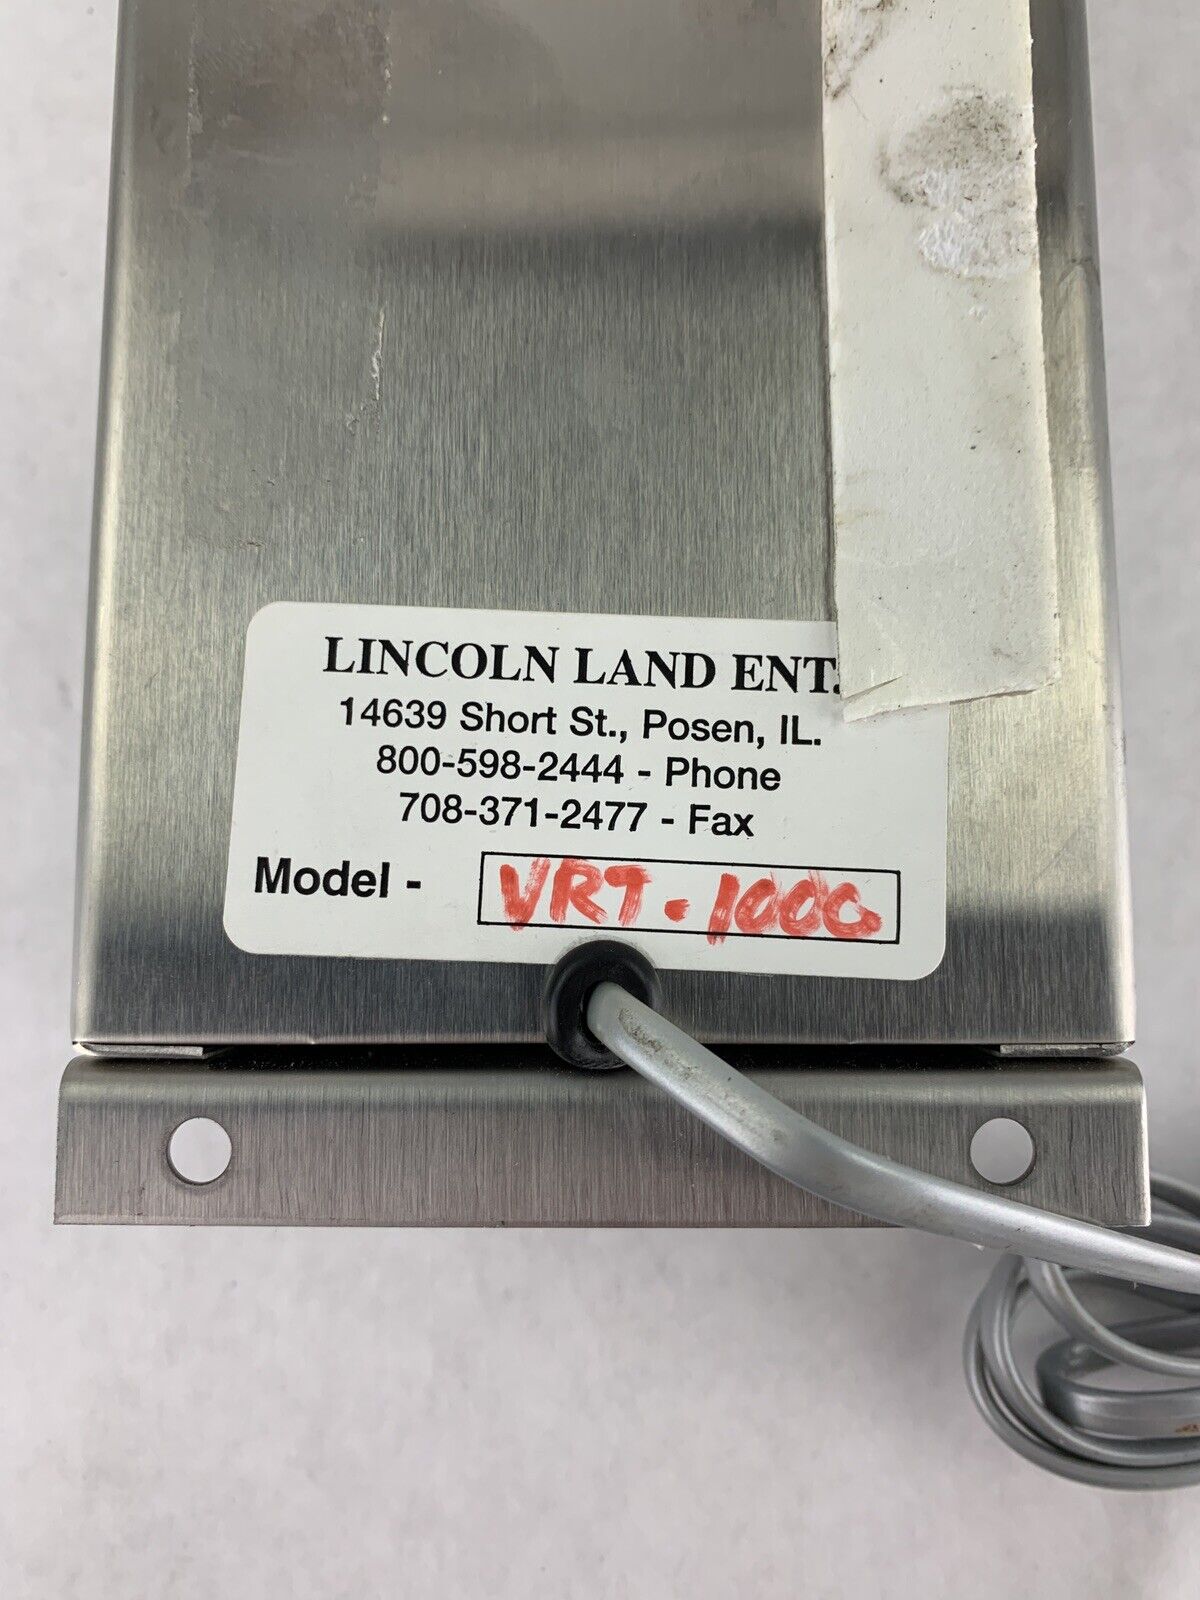 Lincolnland VRT-1000 Surface Mounted Push Button Phone Untested